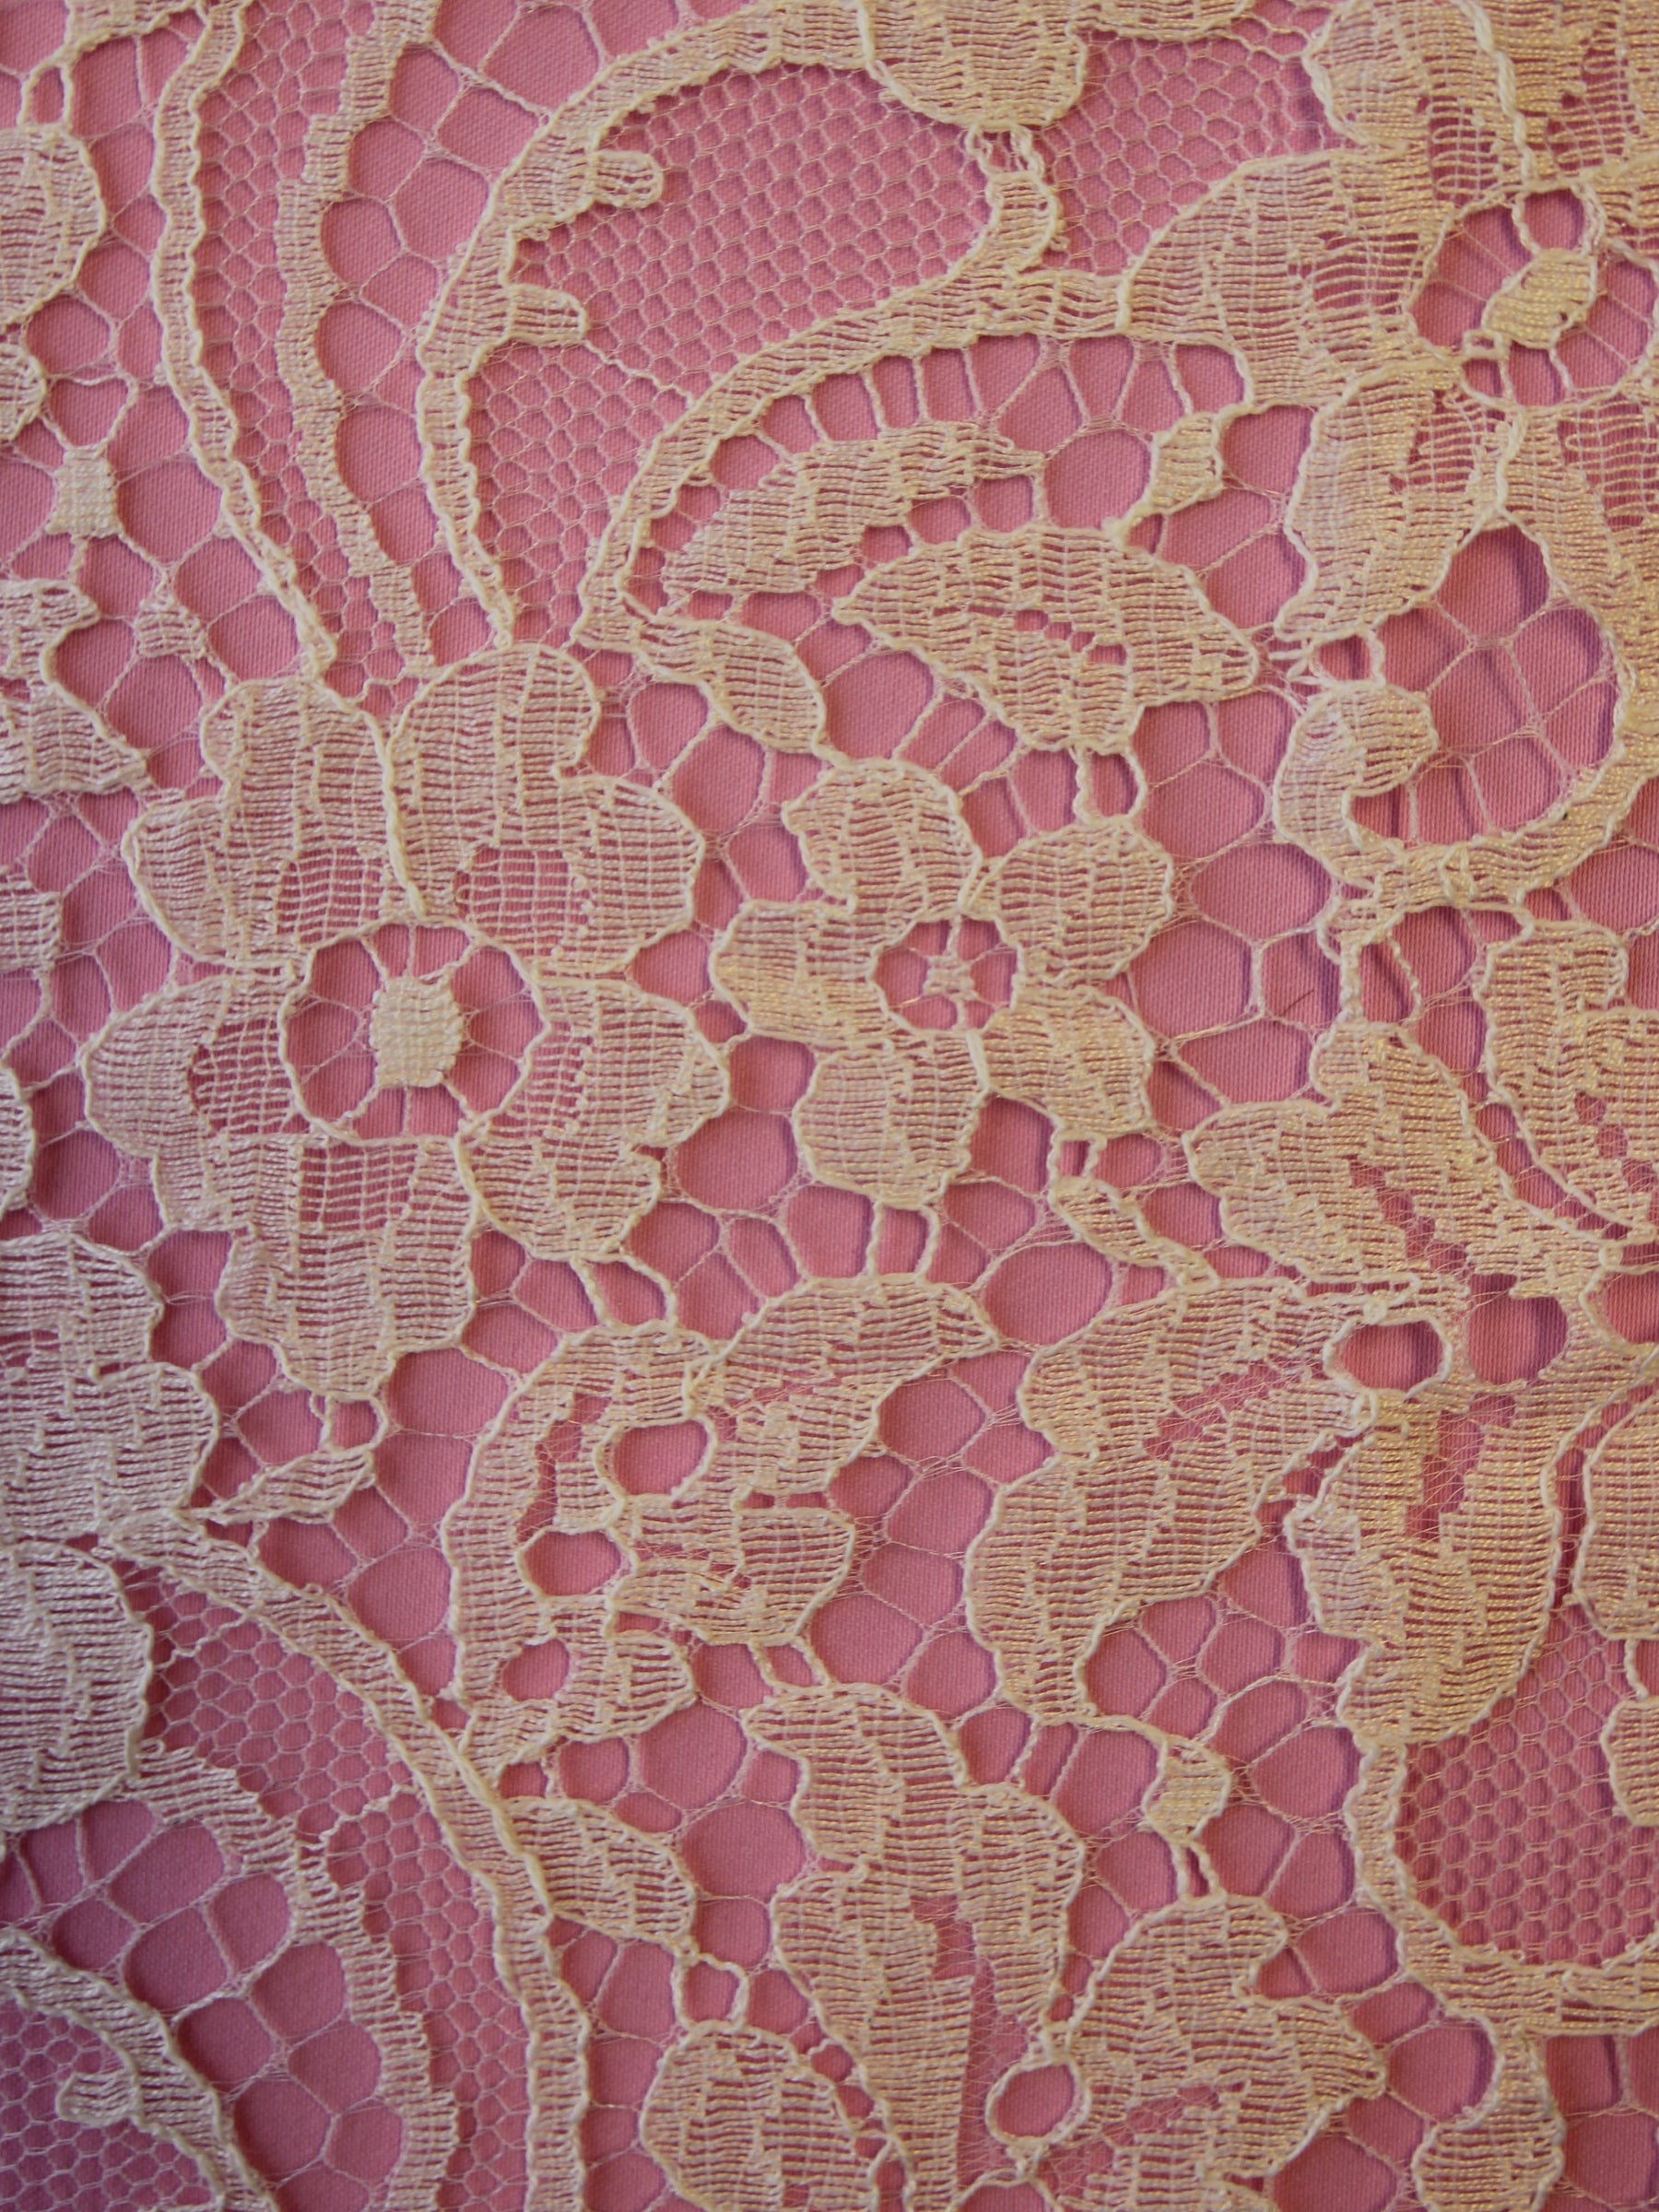 Chantilly Lace, French Chantilly, Roses, 36 wide, Ivory